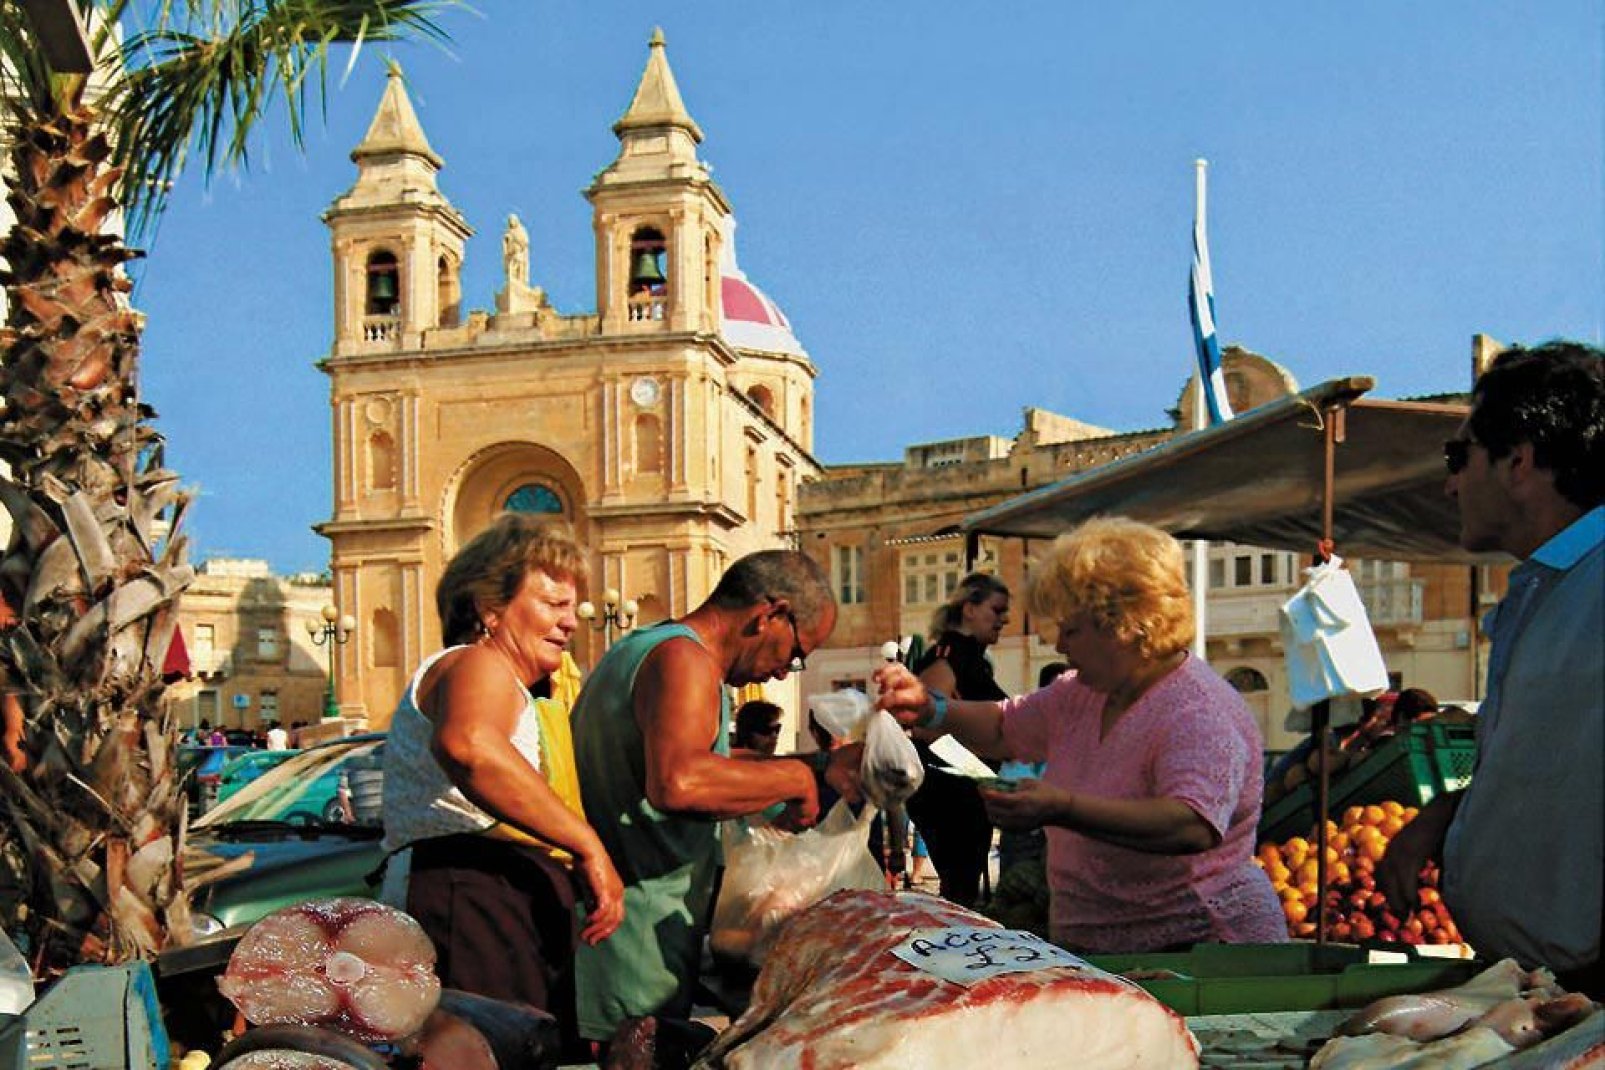 Marsaxlokk is famous for its vibrant markets where you can find the catch of the day.